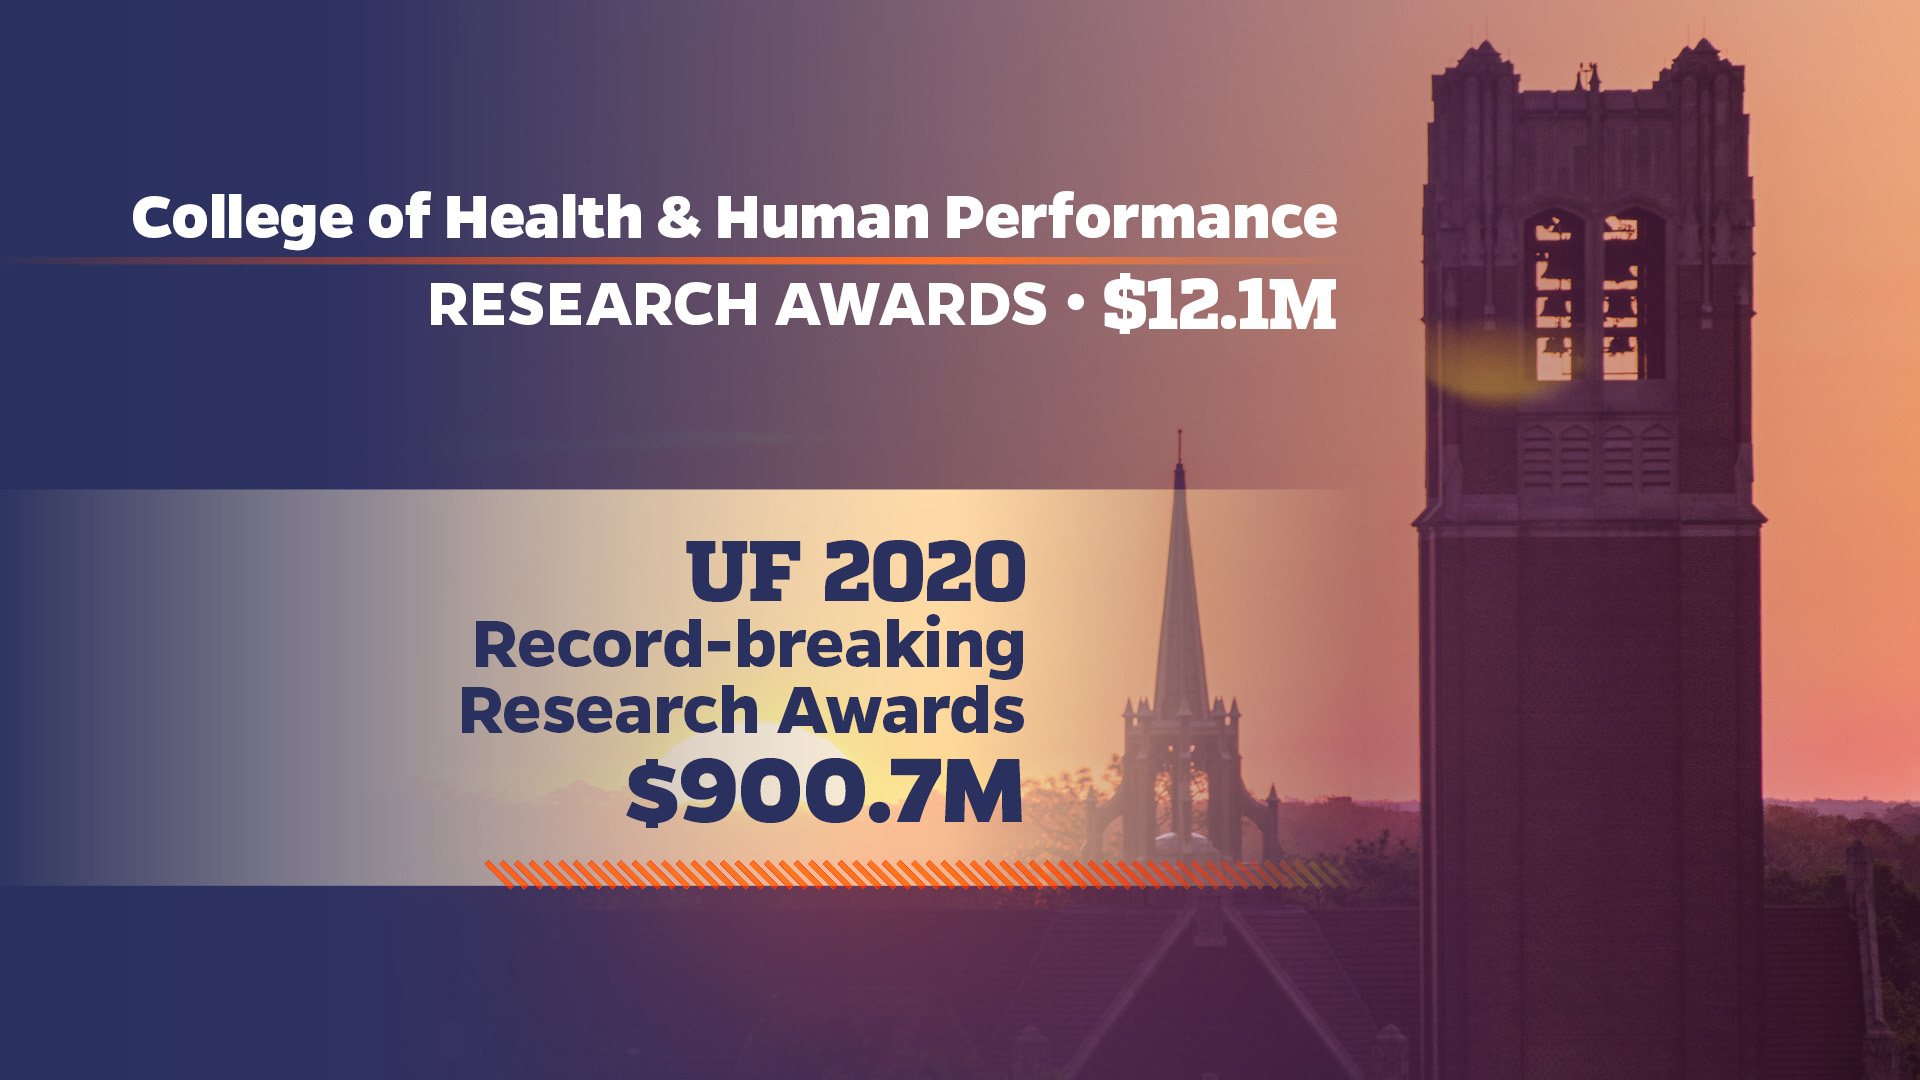 UF and HHP hit record research award levels